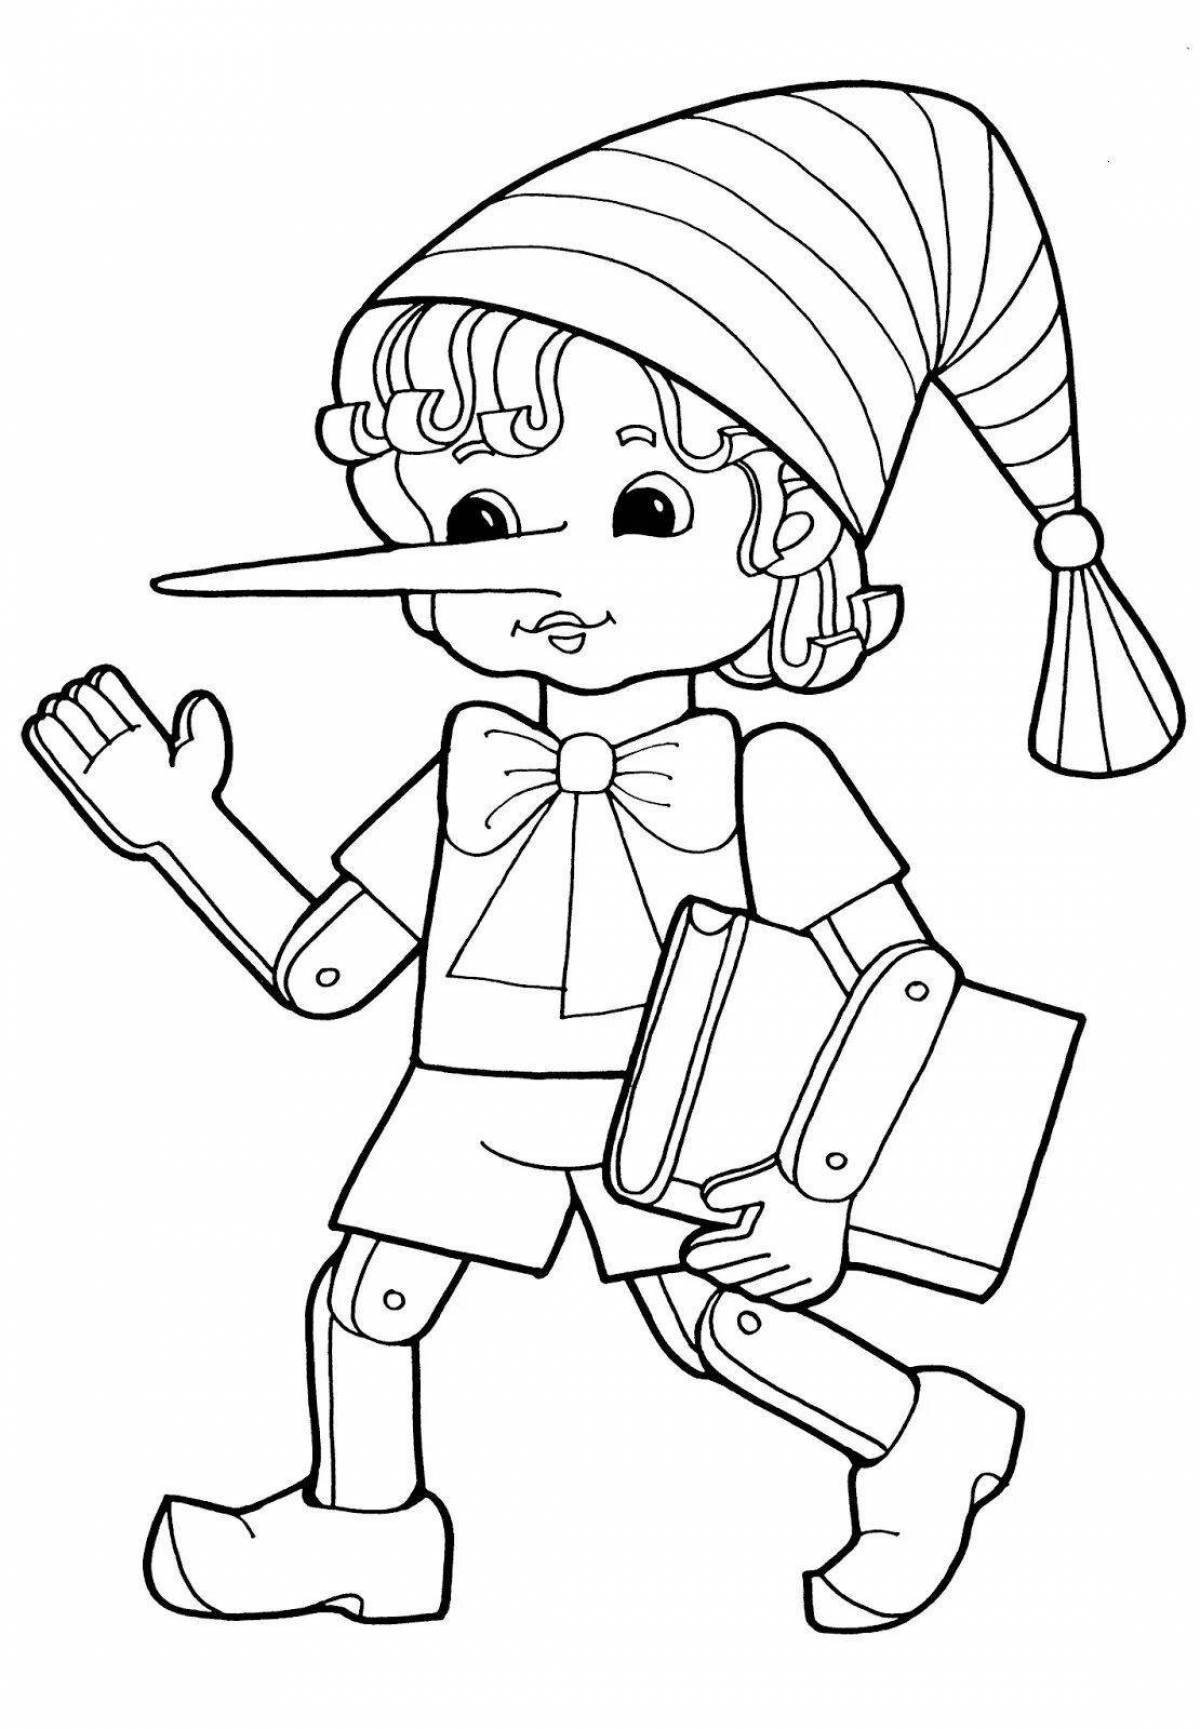 Exotic fairy tale coloring pages for kids